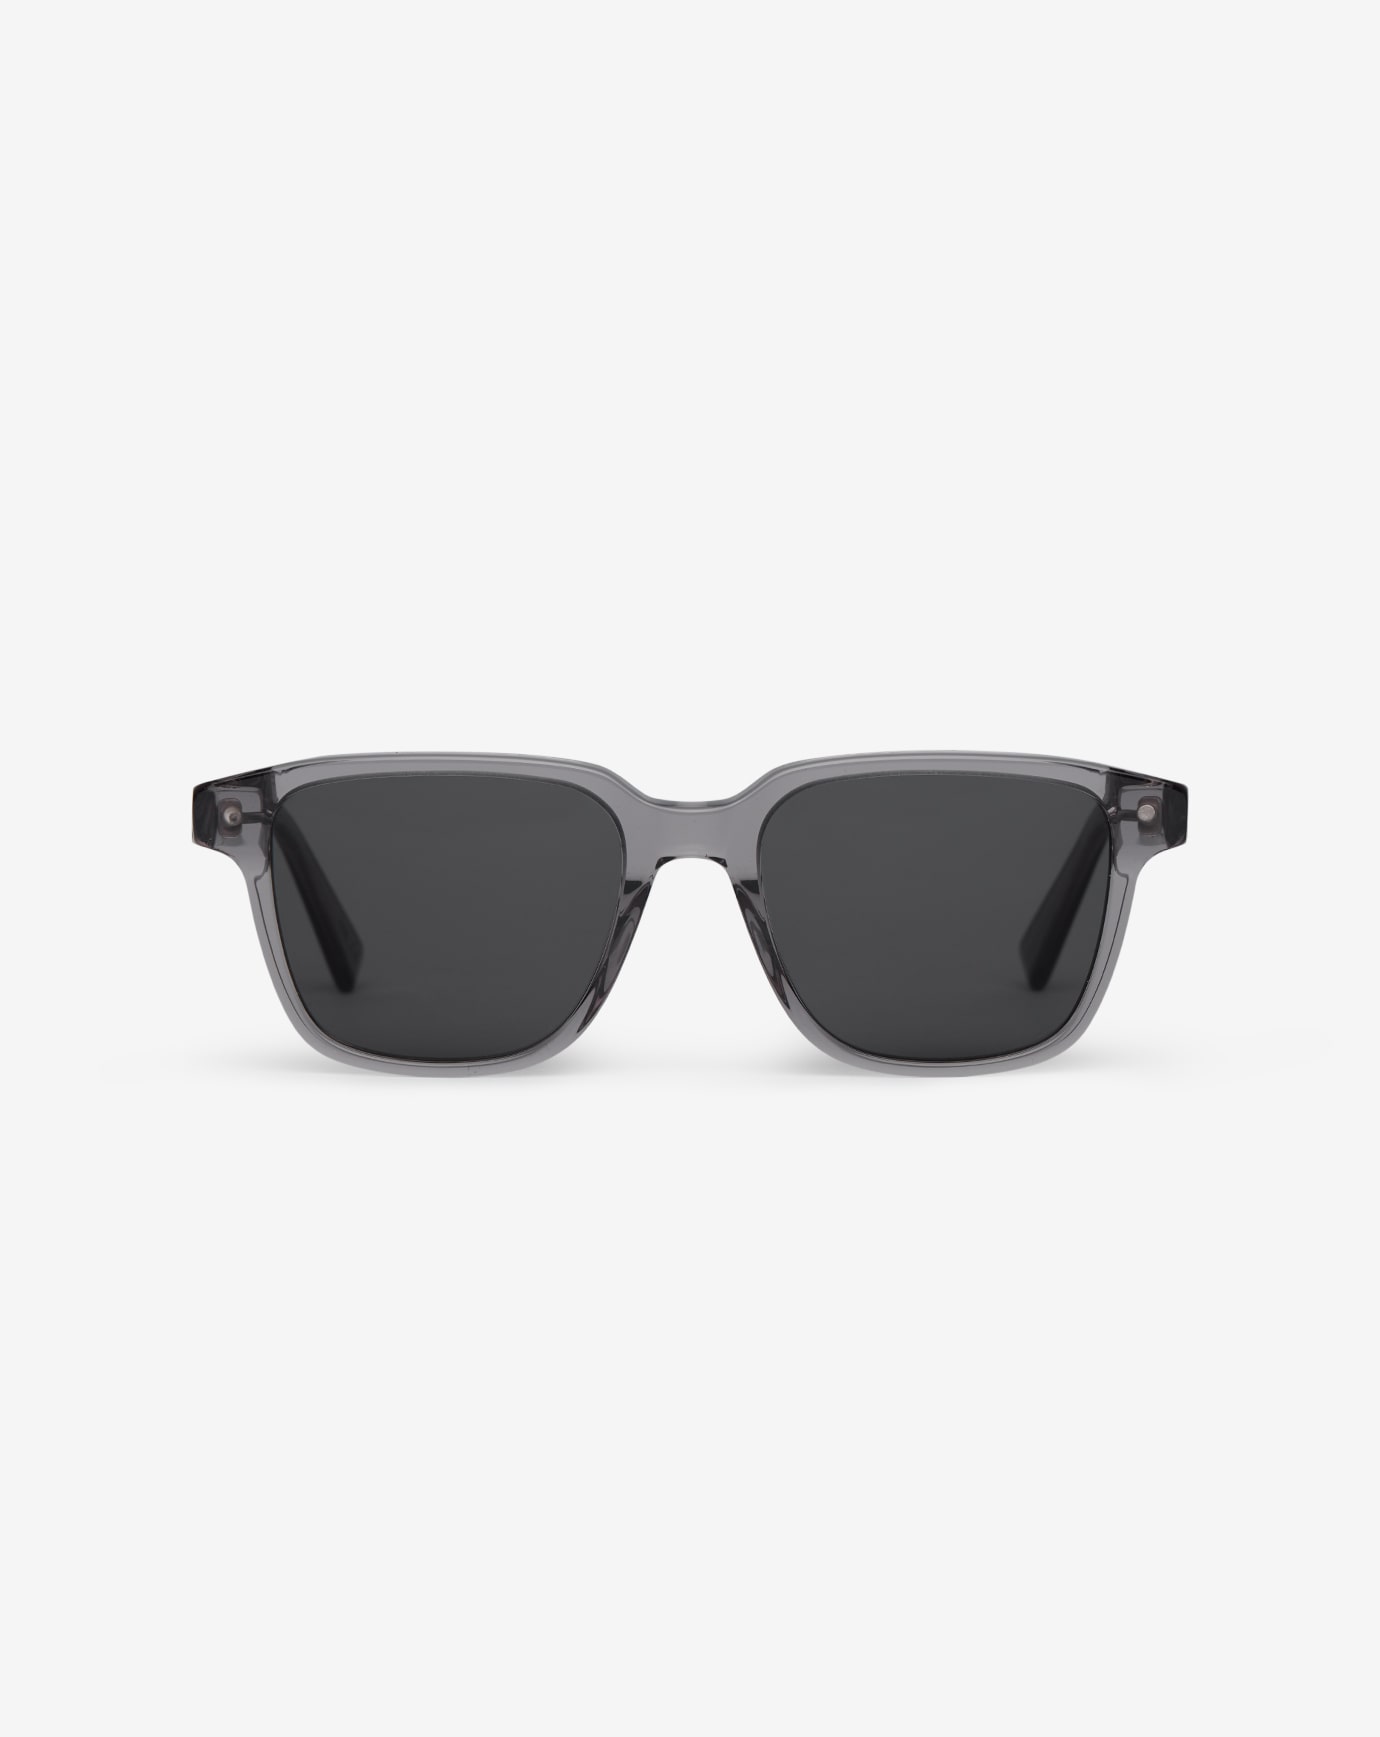 Related Product - OFFDAZE SUNGLASSES